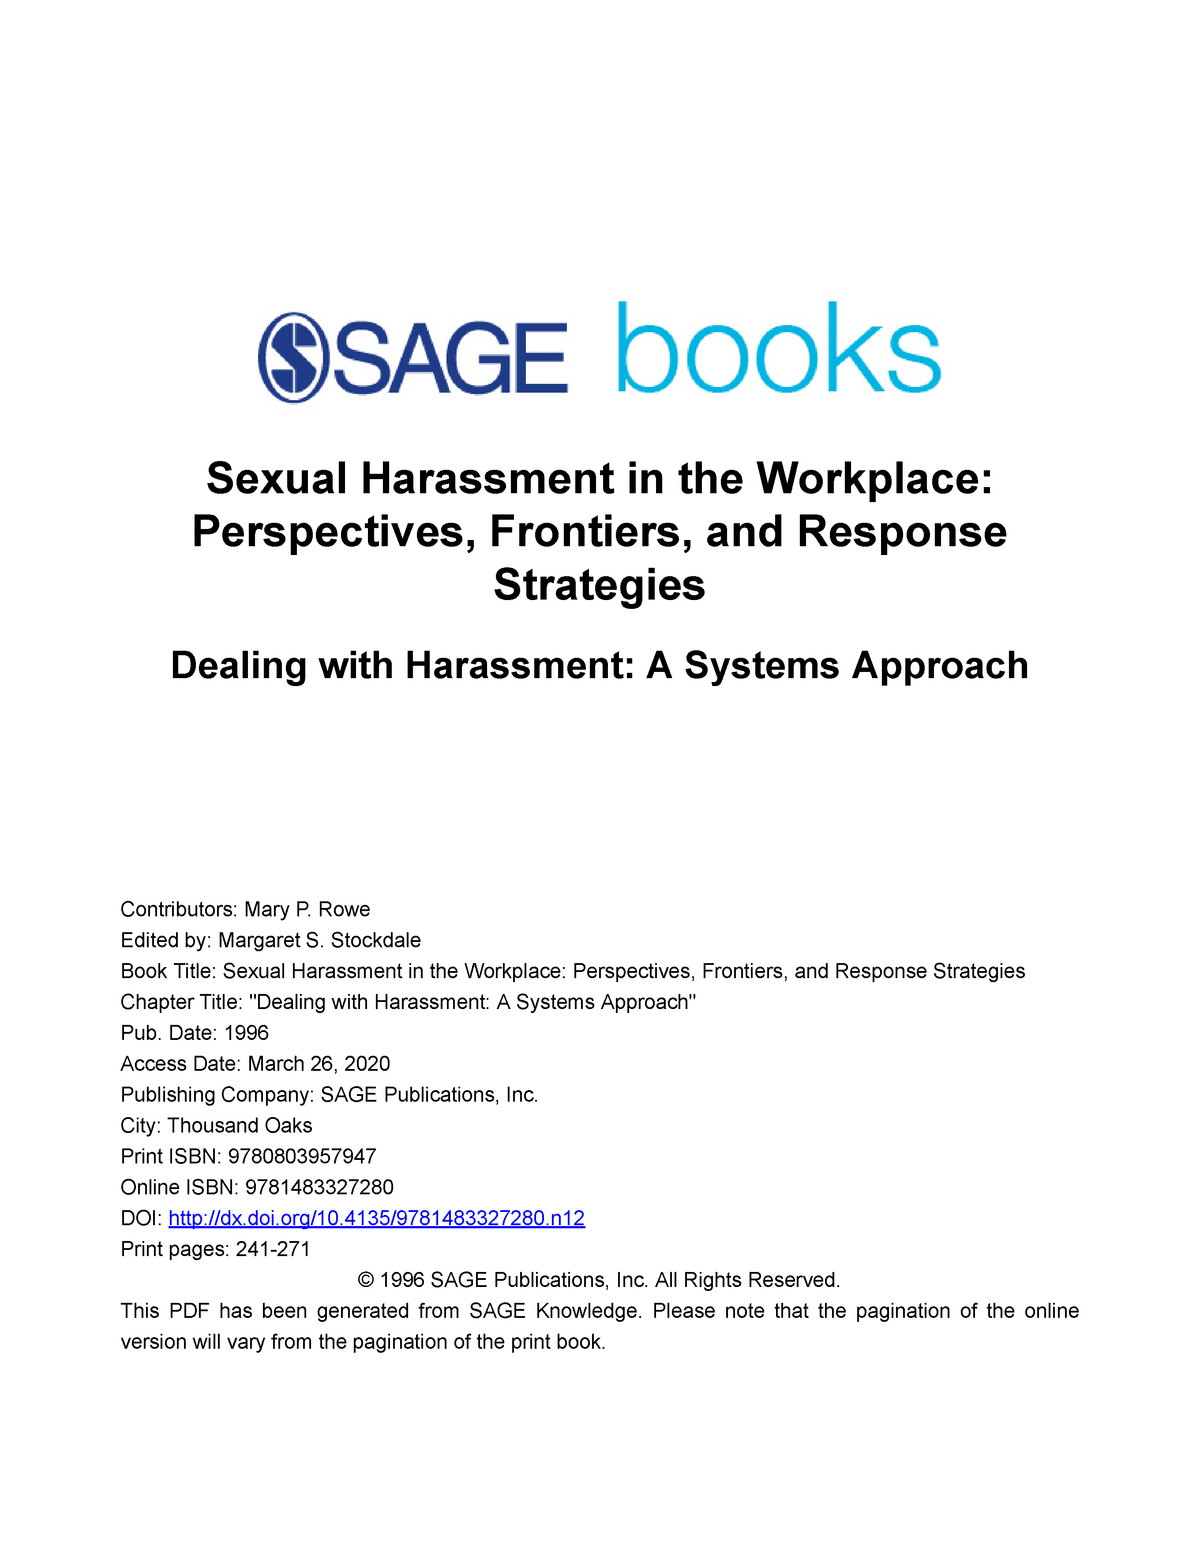 research sexual harassment in